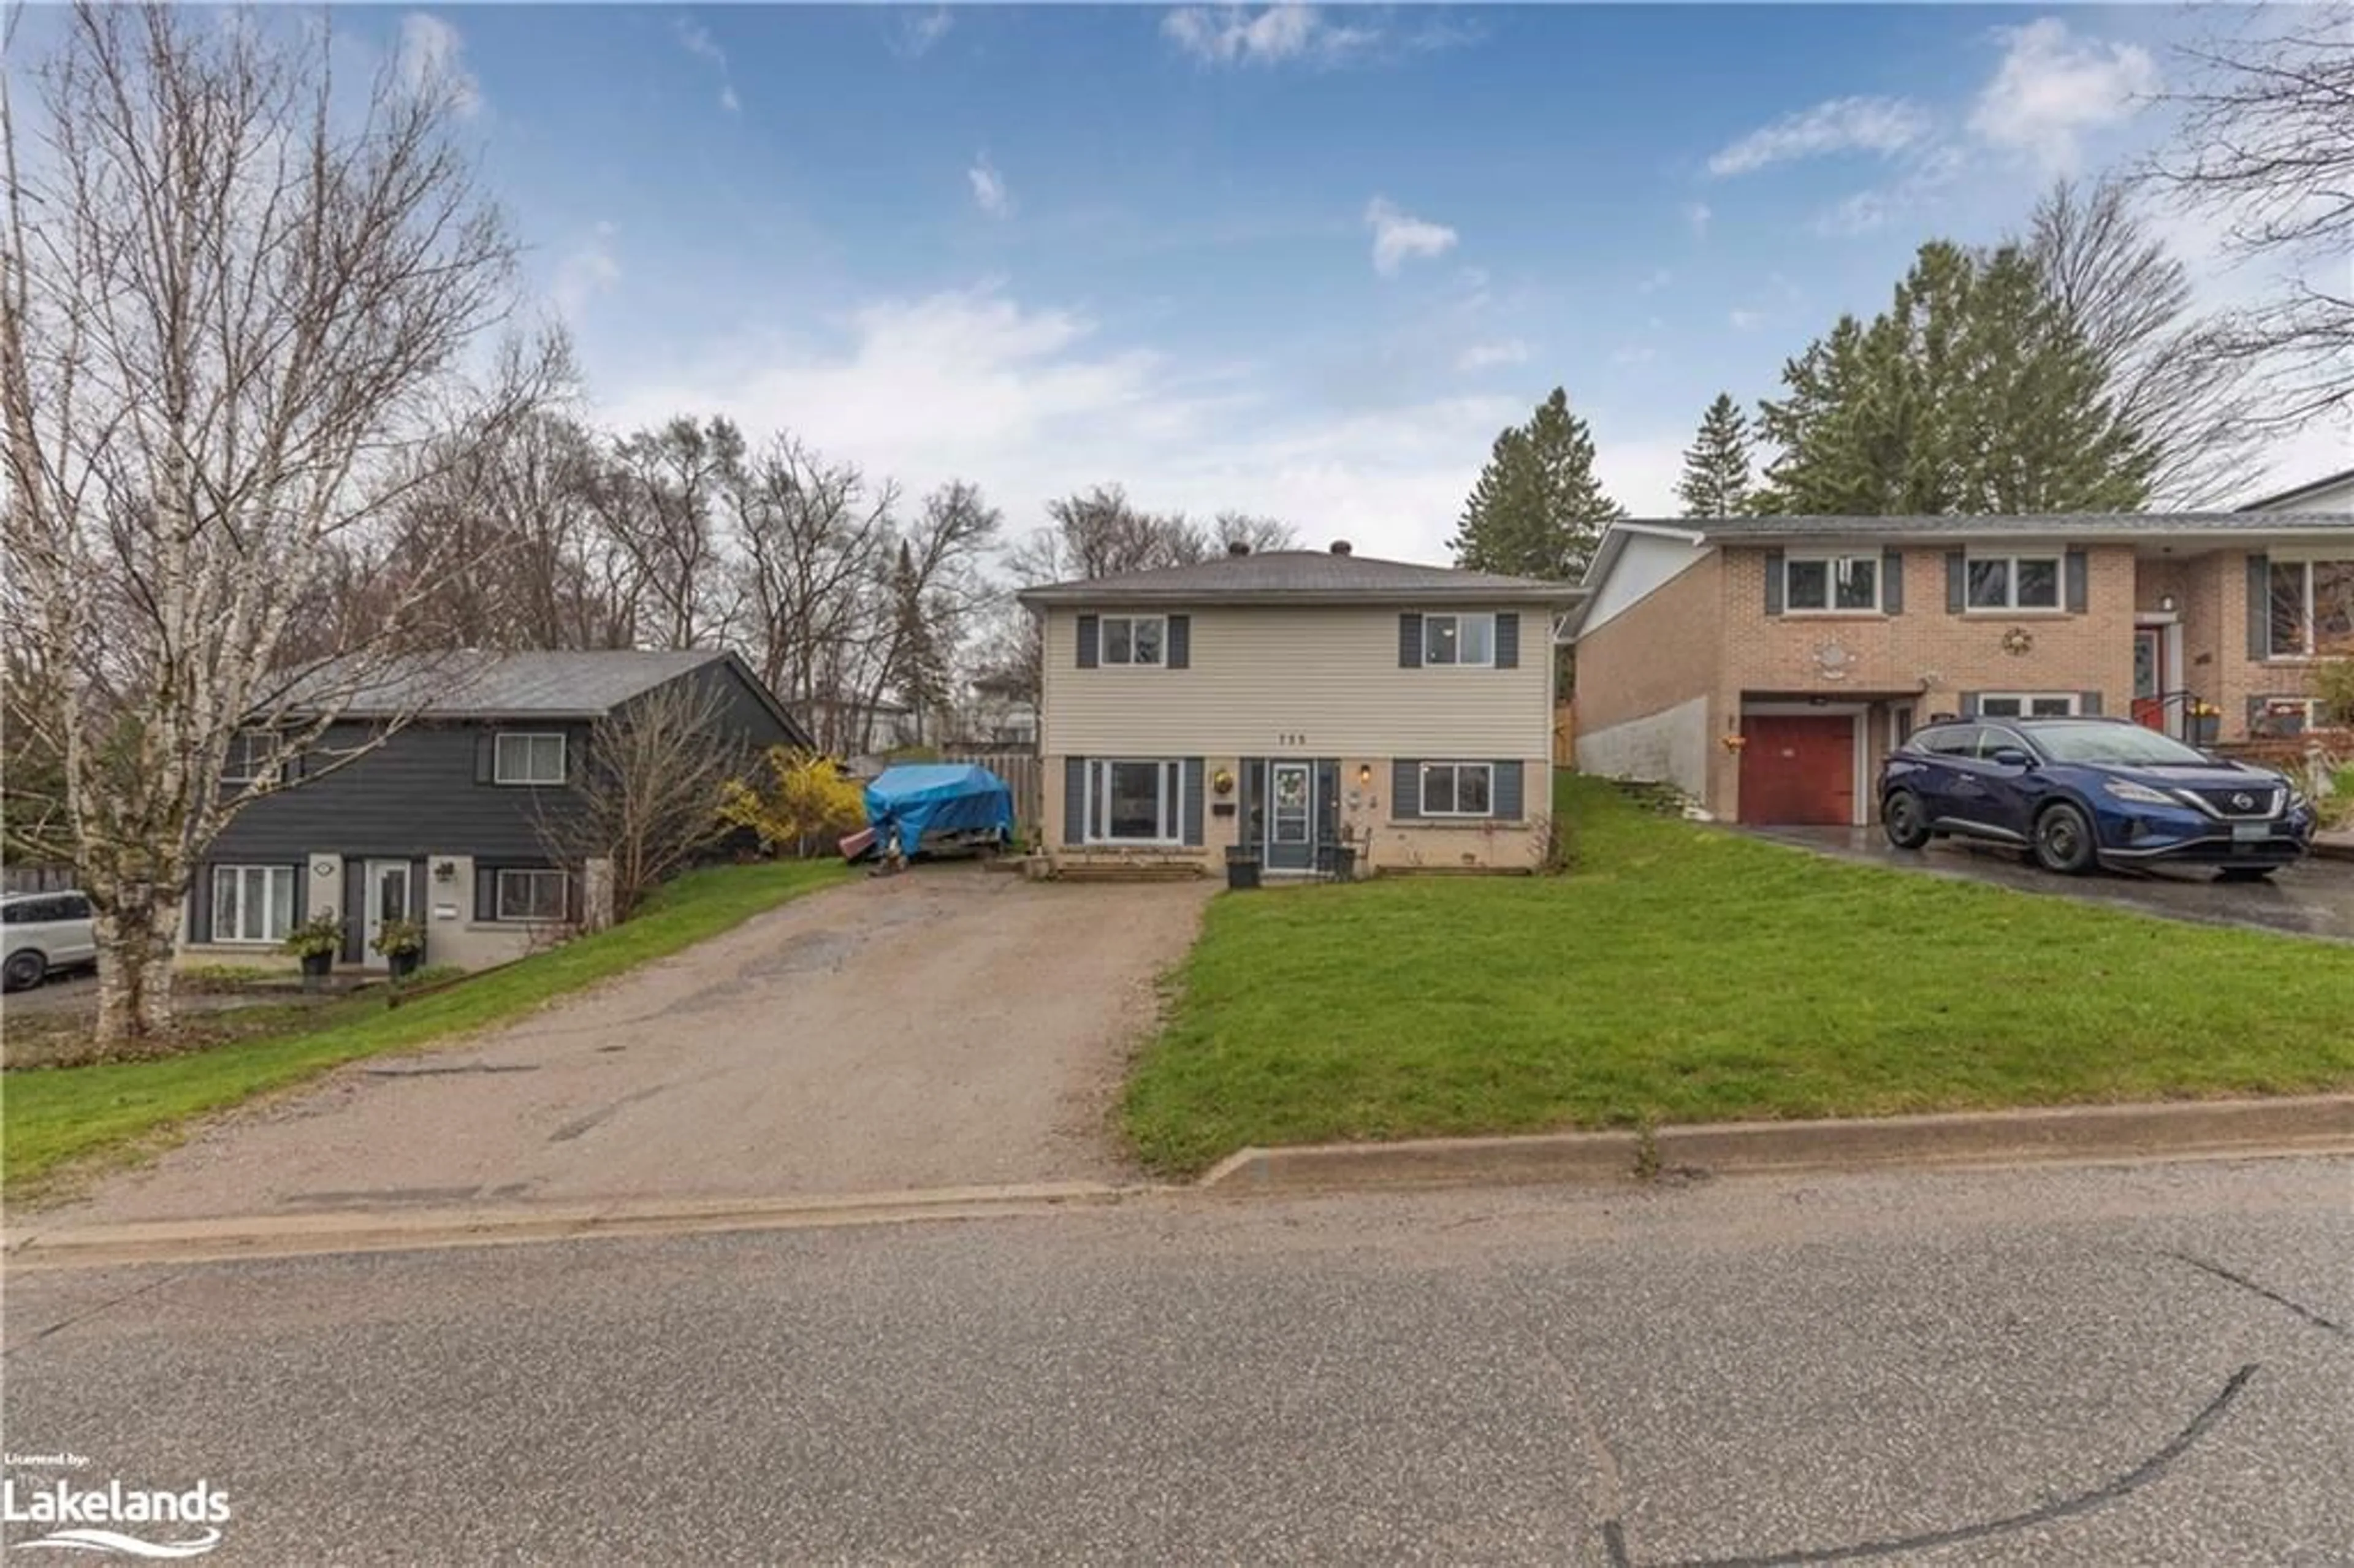 Frontside or backside of a home for 755 Birchwood Dr, Midland Ontario L4R 2P8